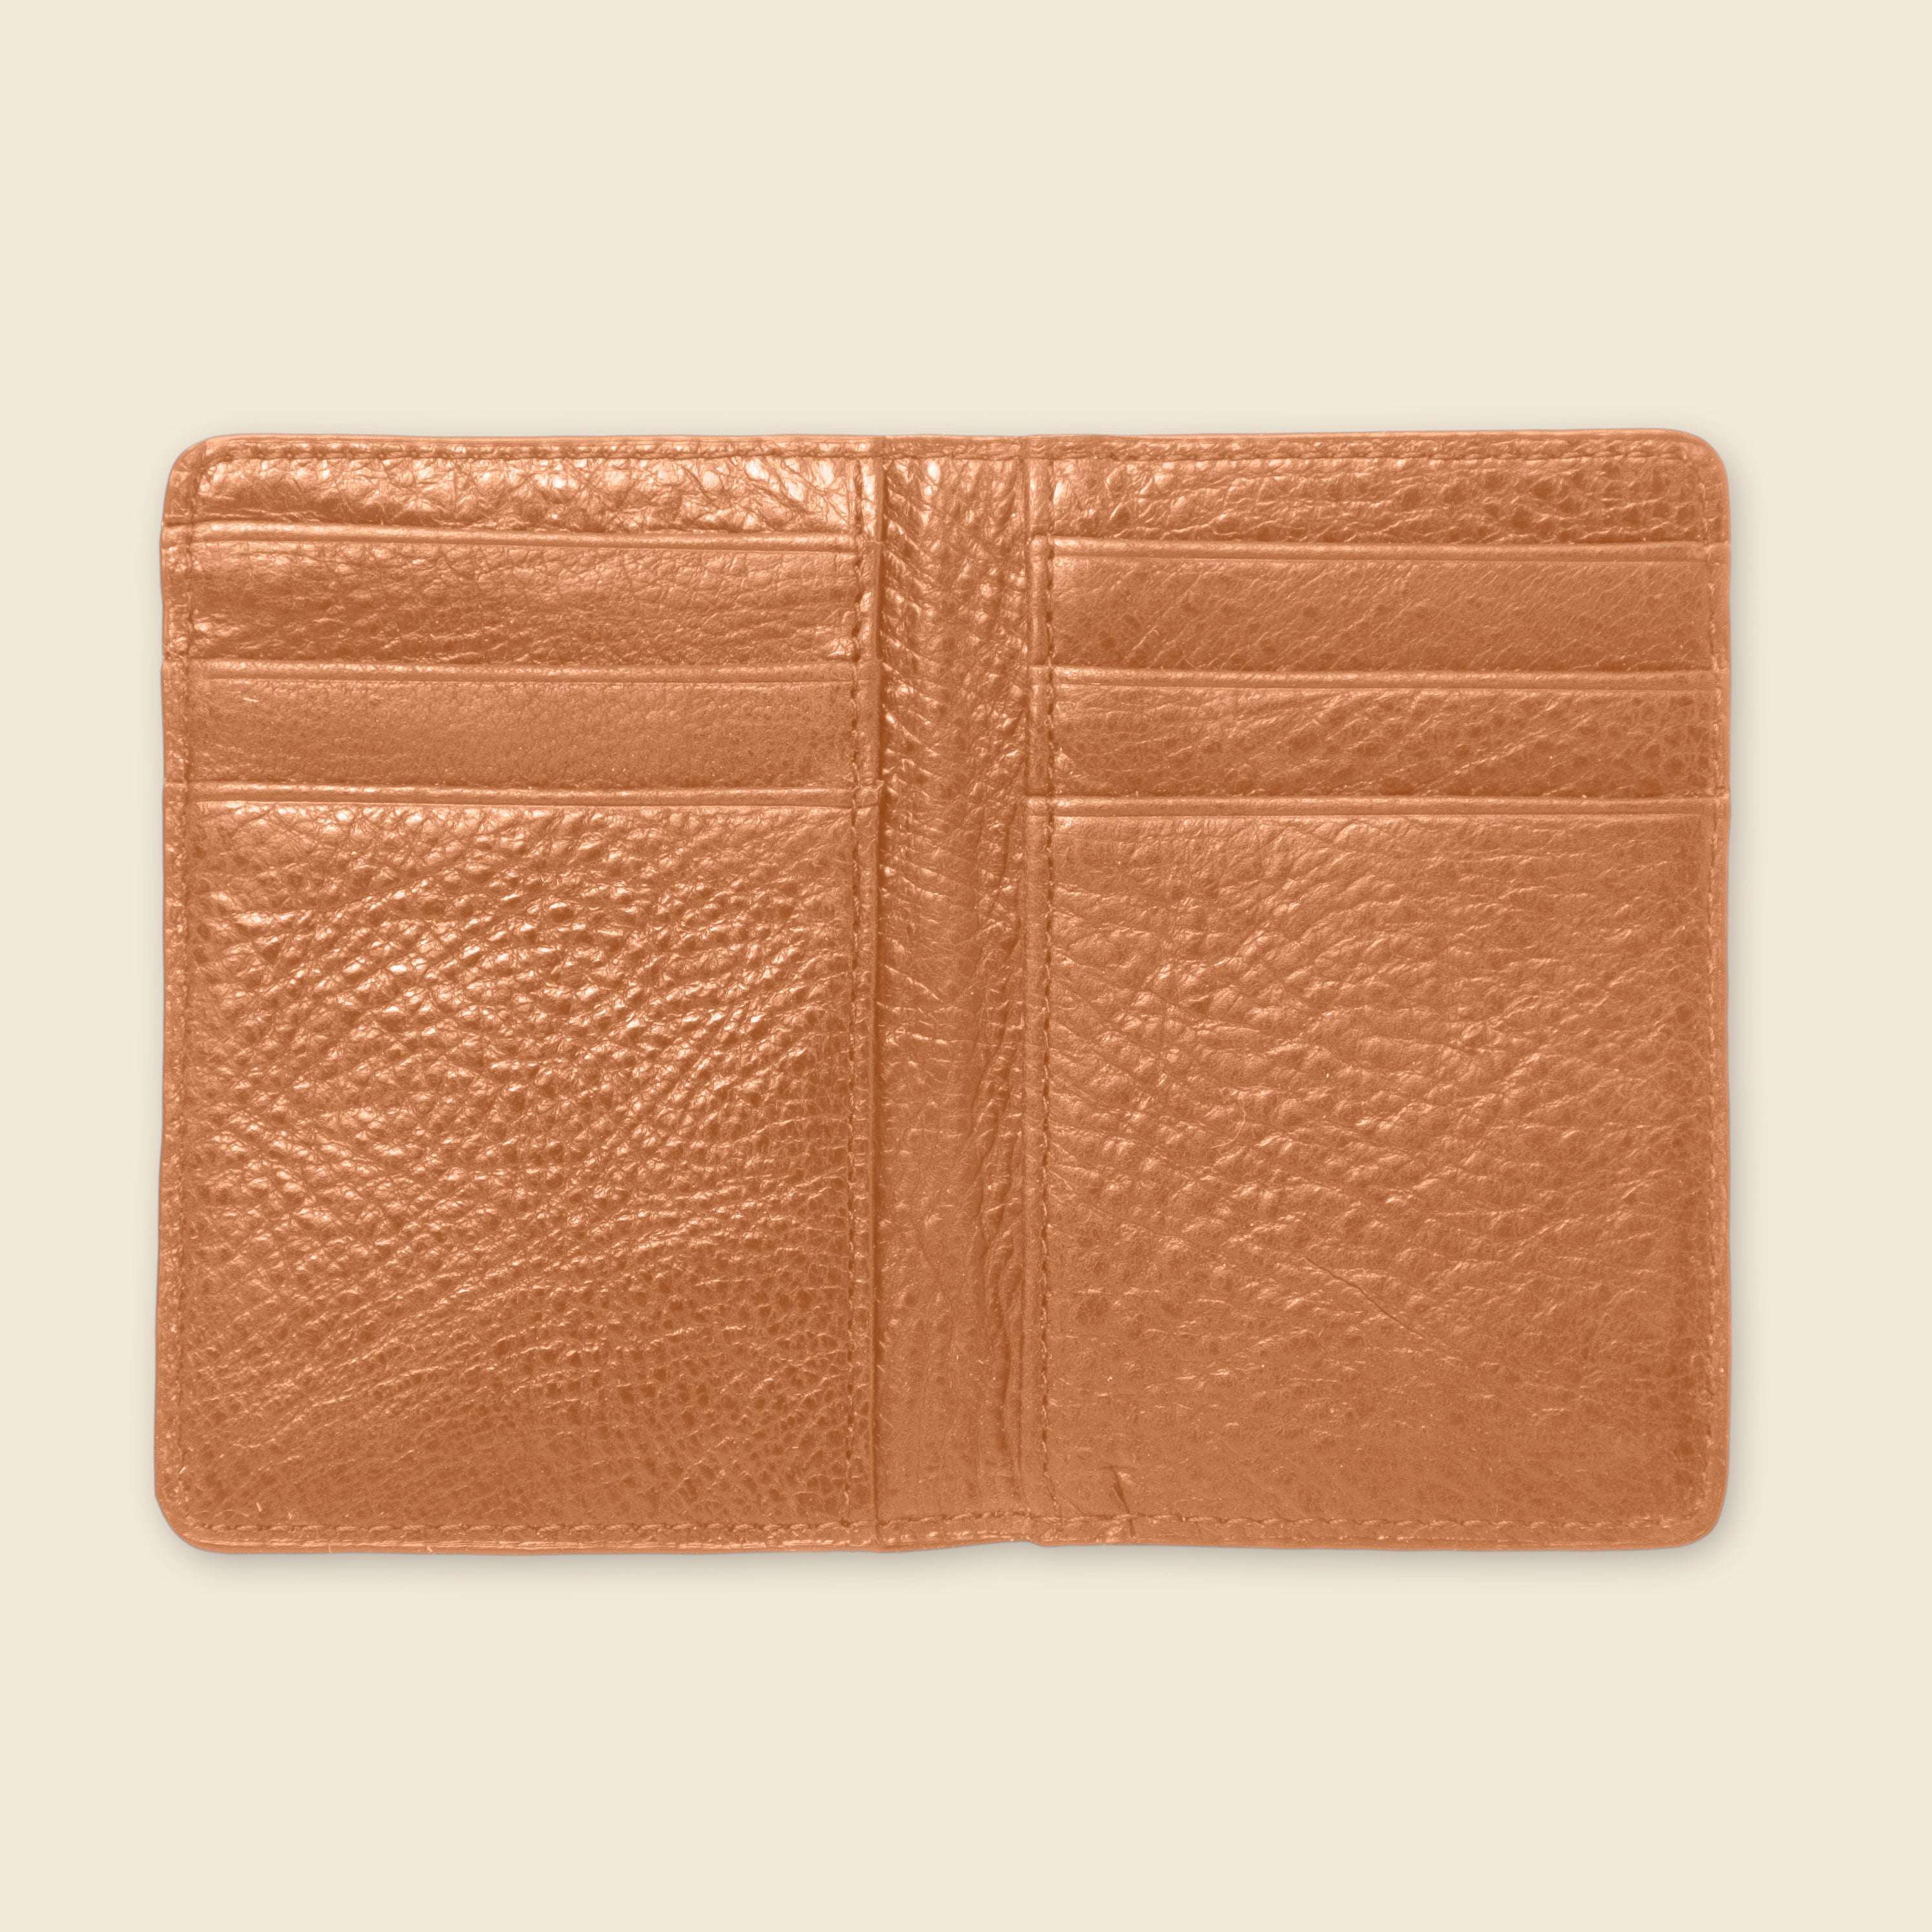 White label leather bifold wallet for corporate gifts